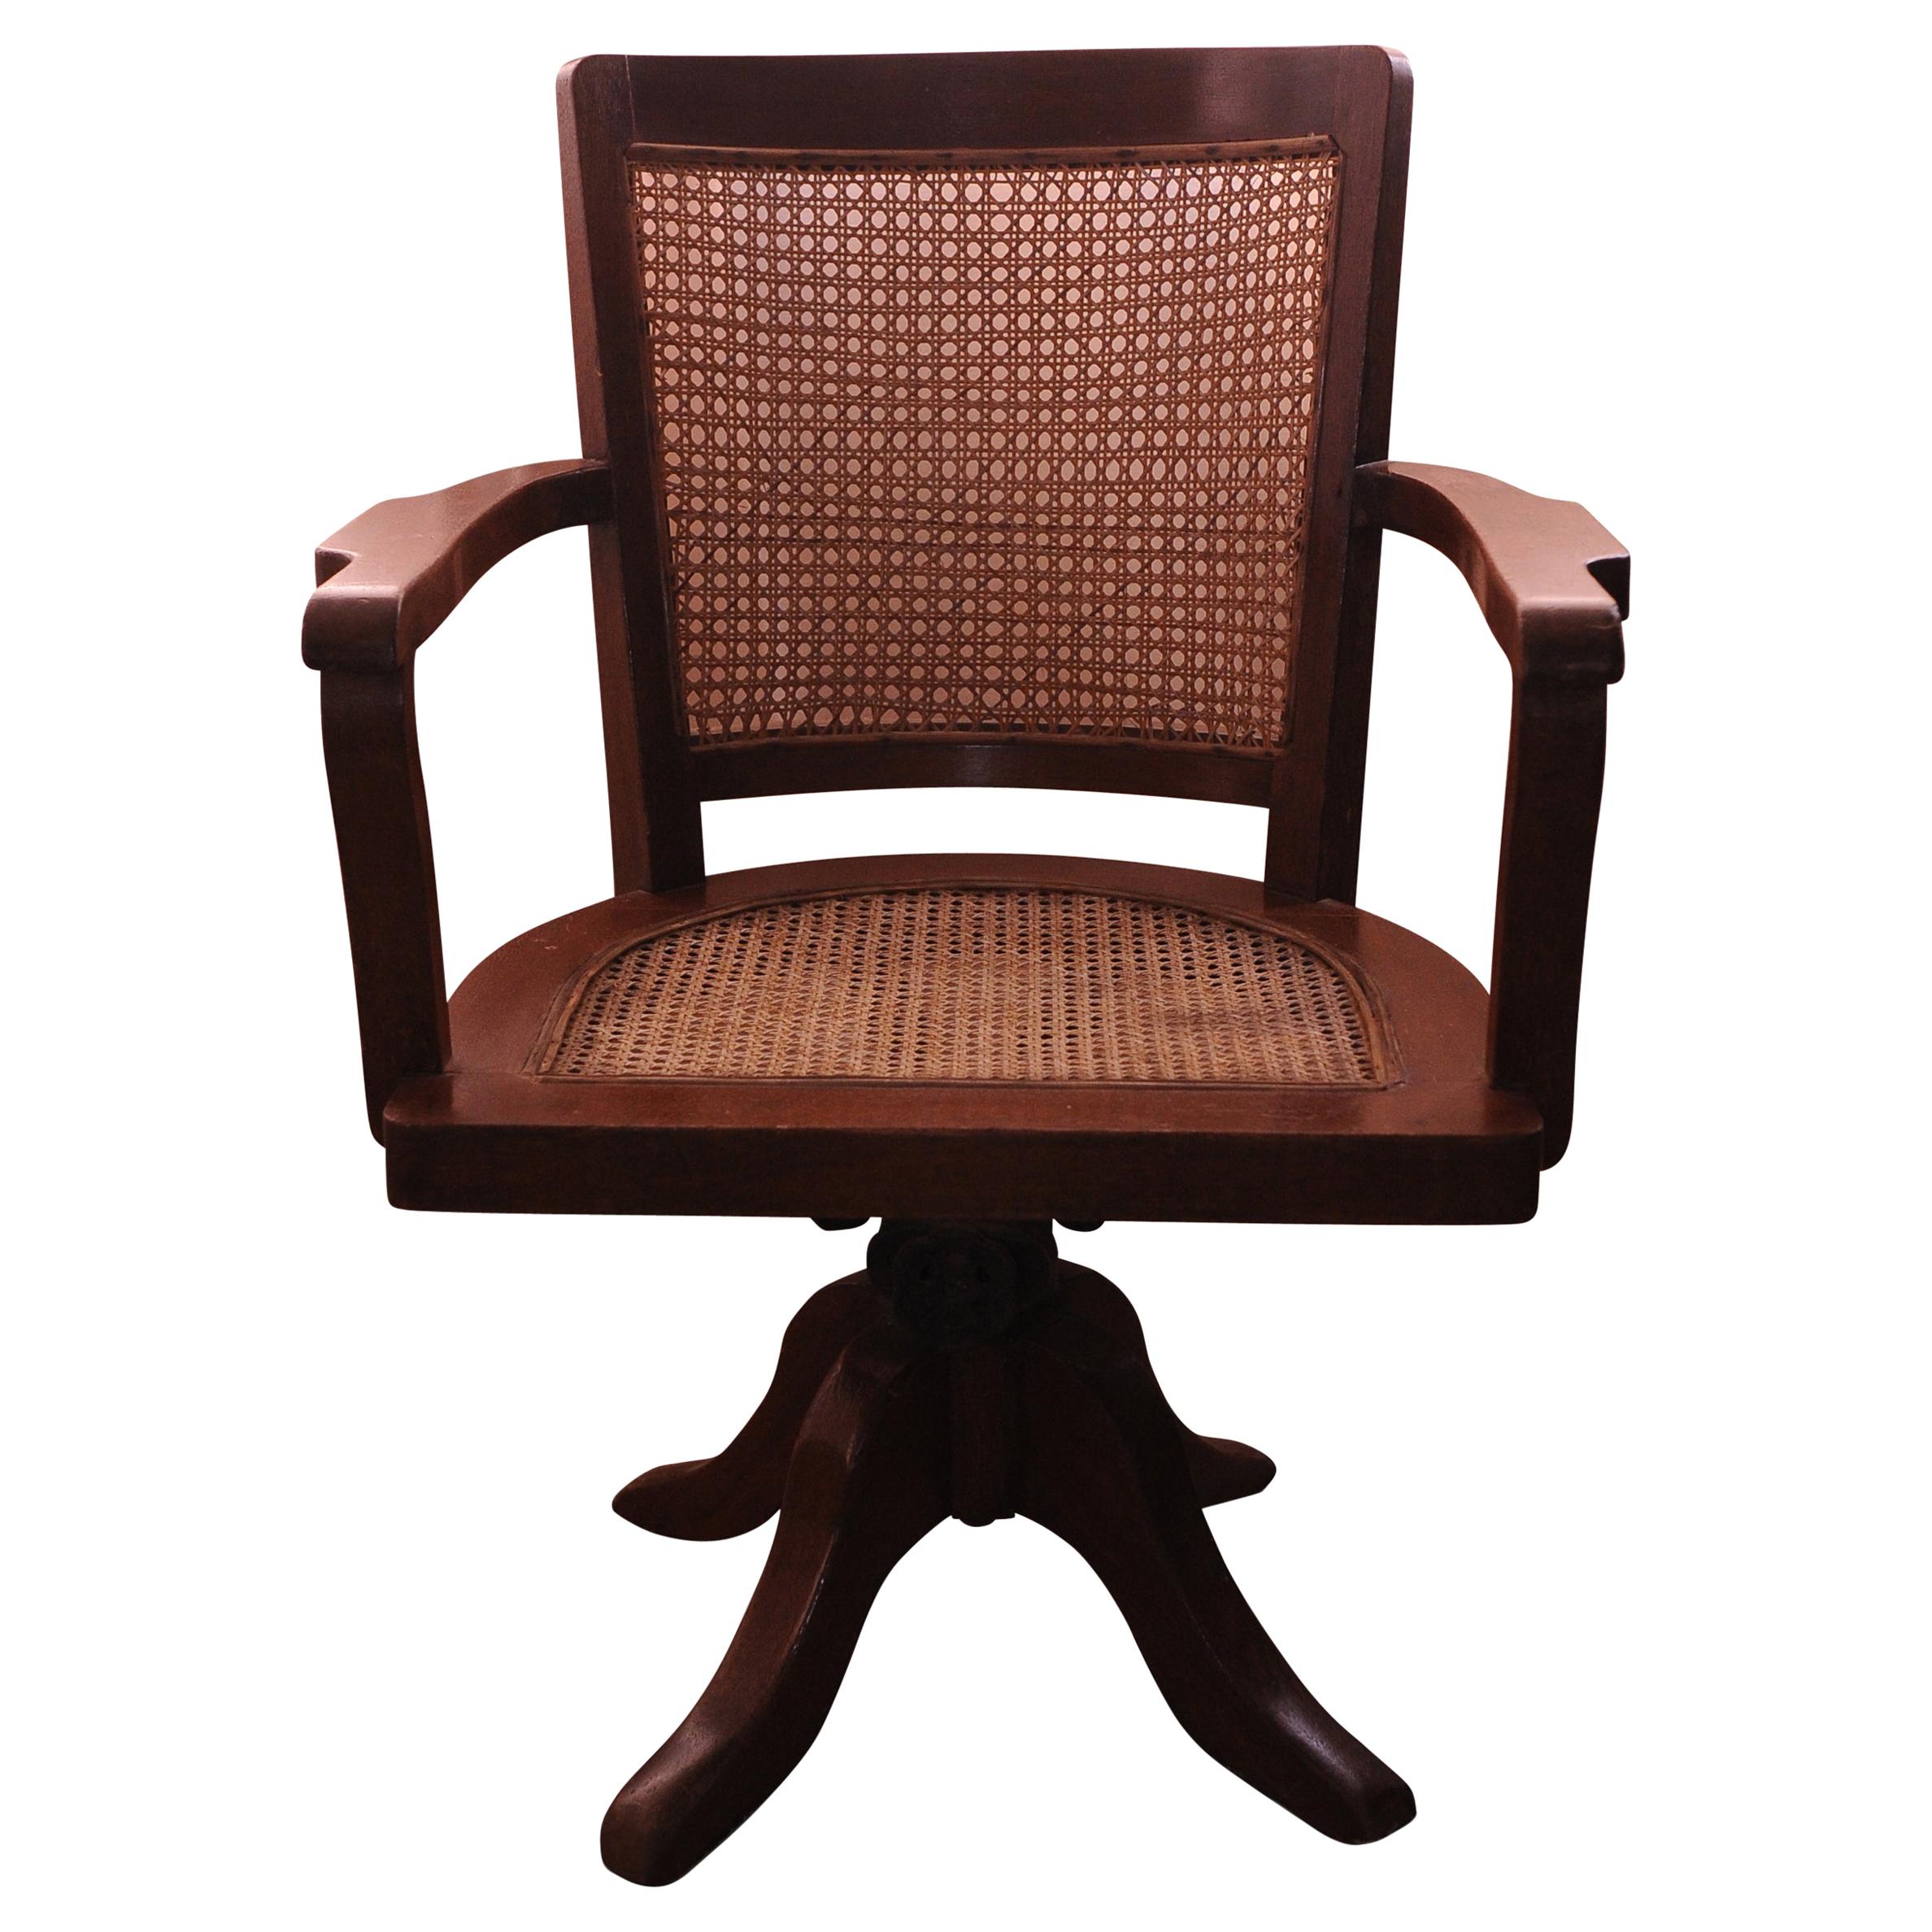 Early 20th Century Oak, Revolving, Rattan / Cane Clerks Office Desk Chair For Sale